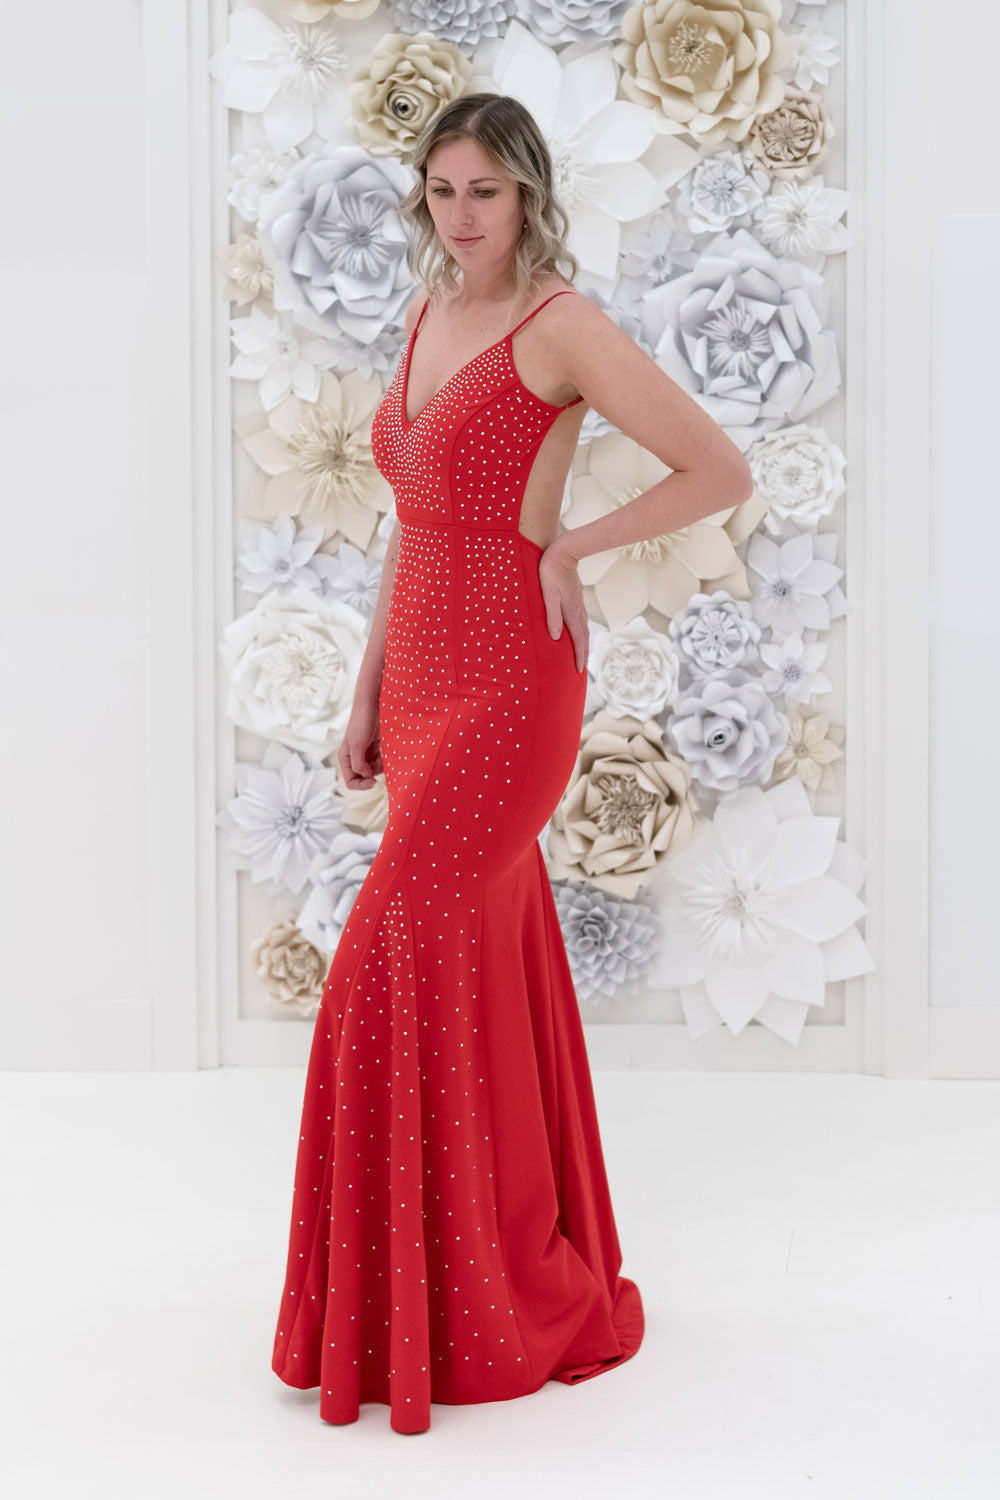 Teghan Studded Evening Dress in Red